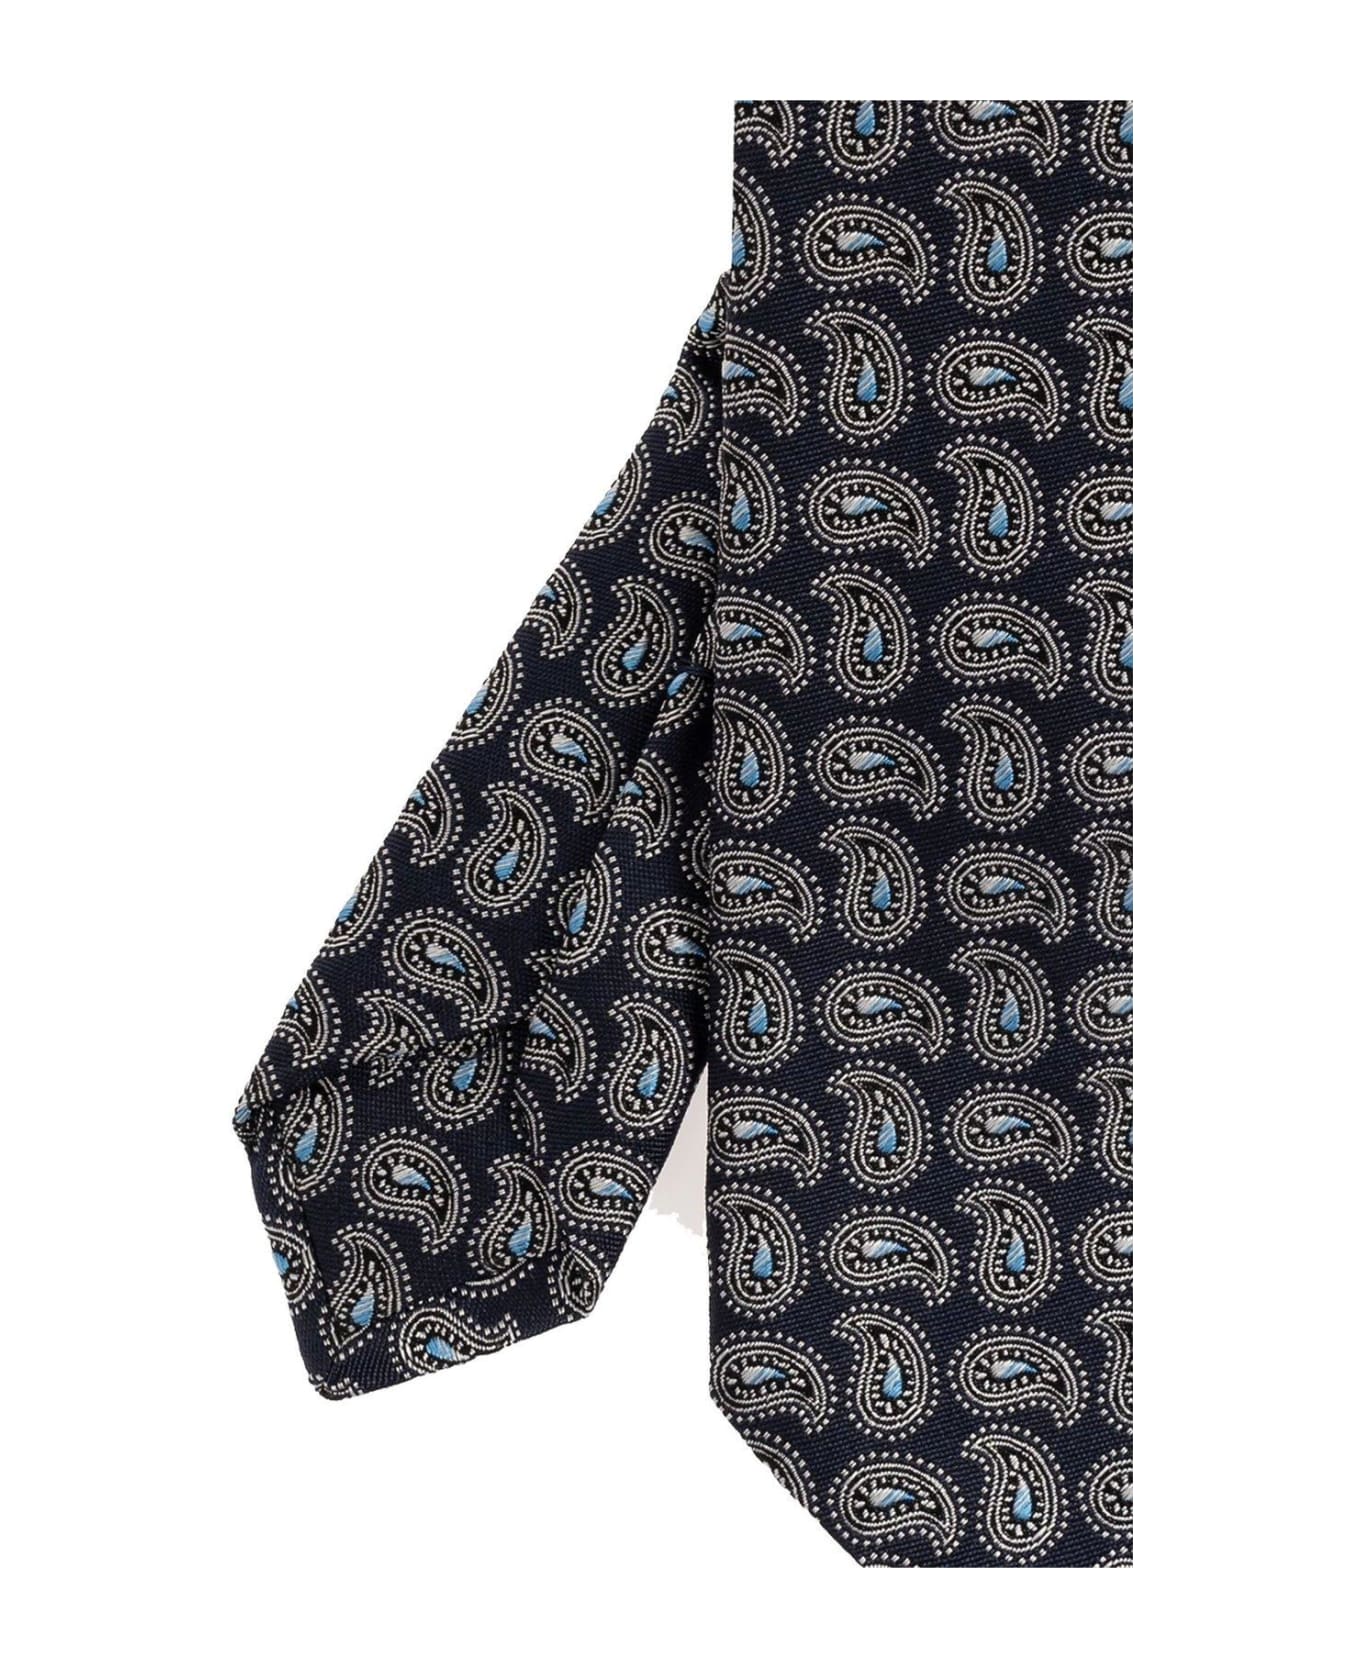 Etro Patterned Tie - Blue ネクタイ